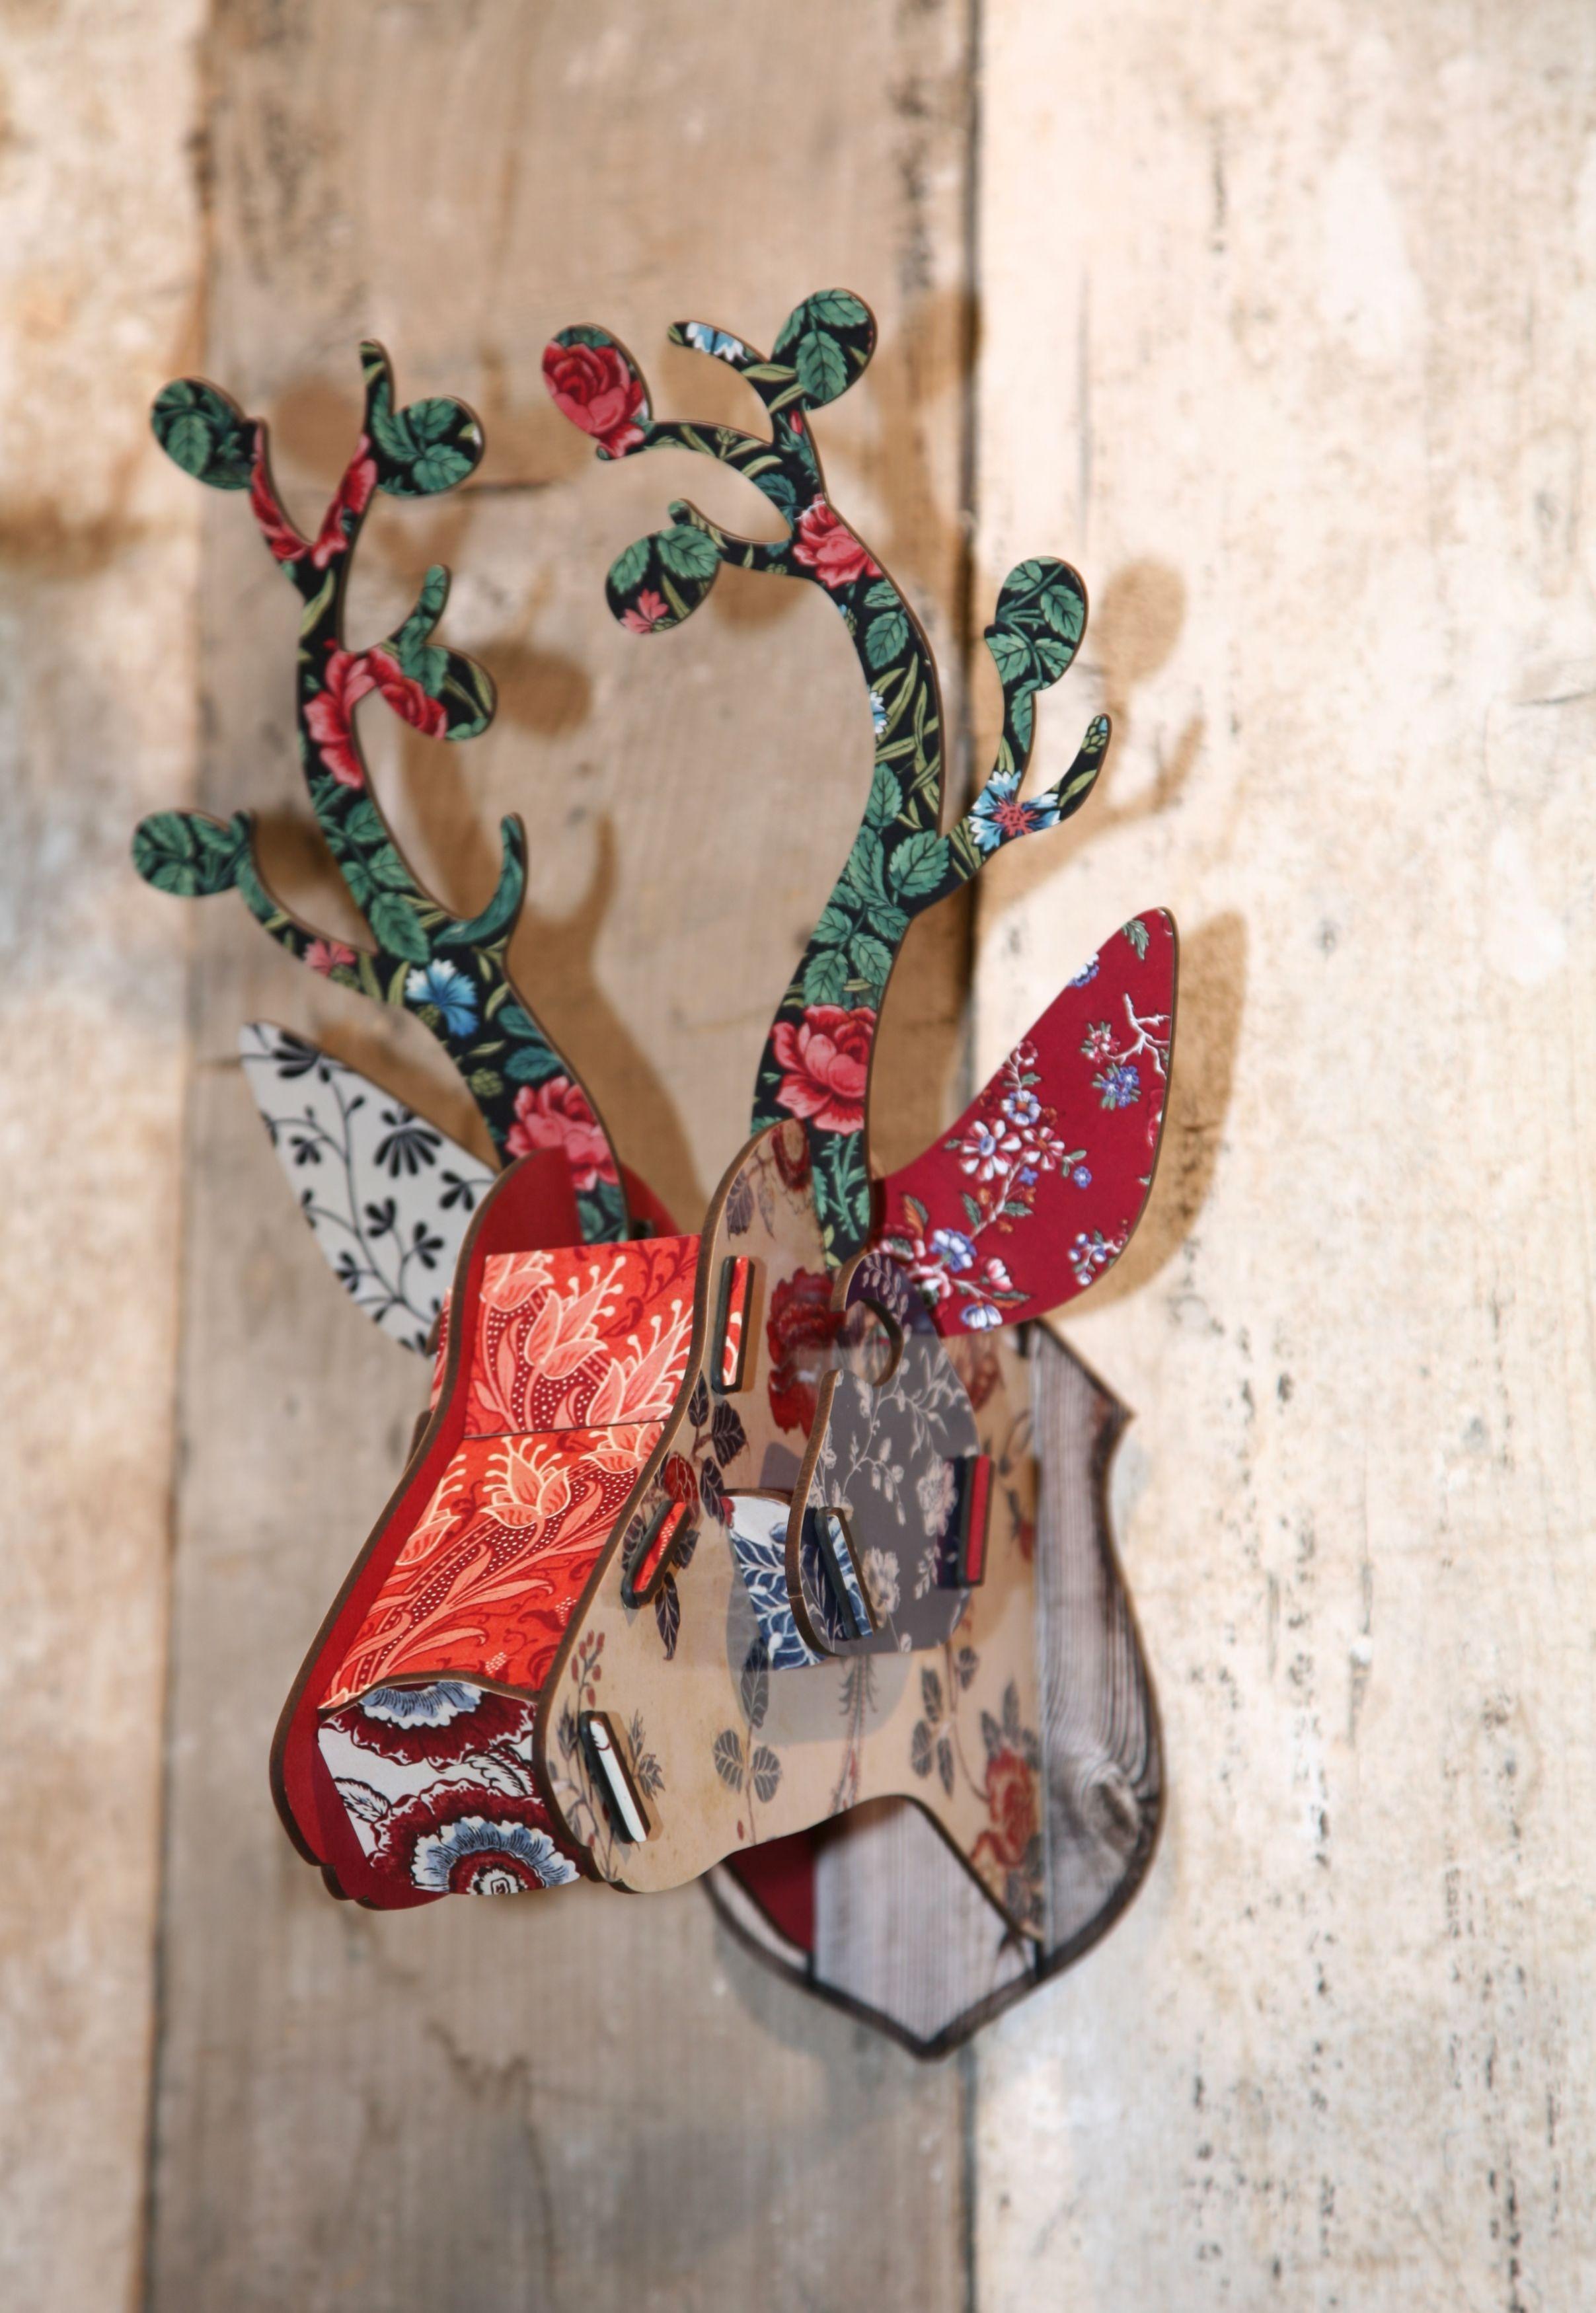 Unusual wall decoration for any room, with a great variety of flowers in red, blue and cream shades. 
Crafted from MDF in Germany, each deer head arrives flat packed with simple instructions: fun and easy to assemble. Sections click together and are